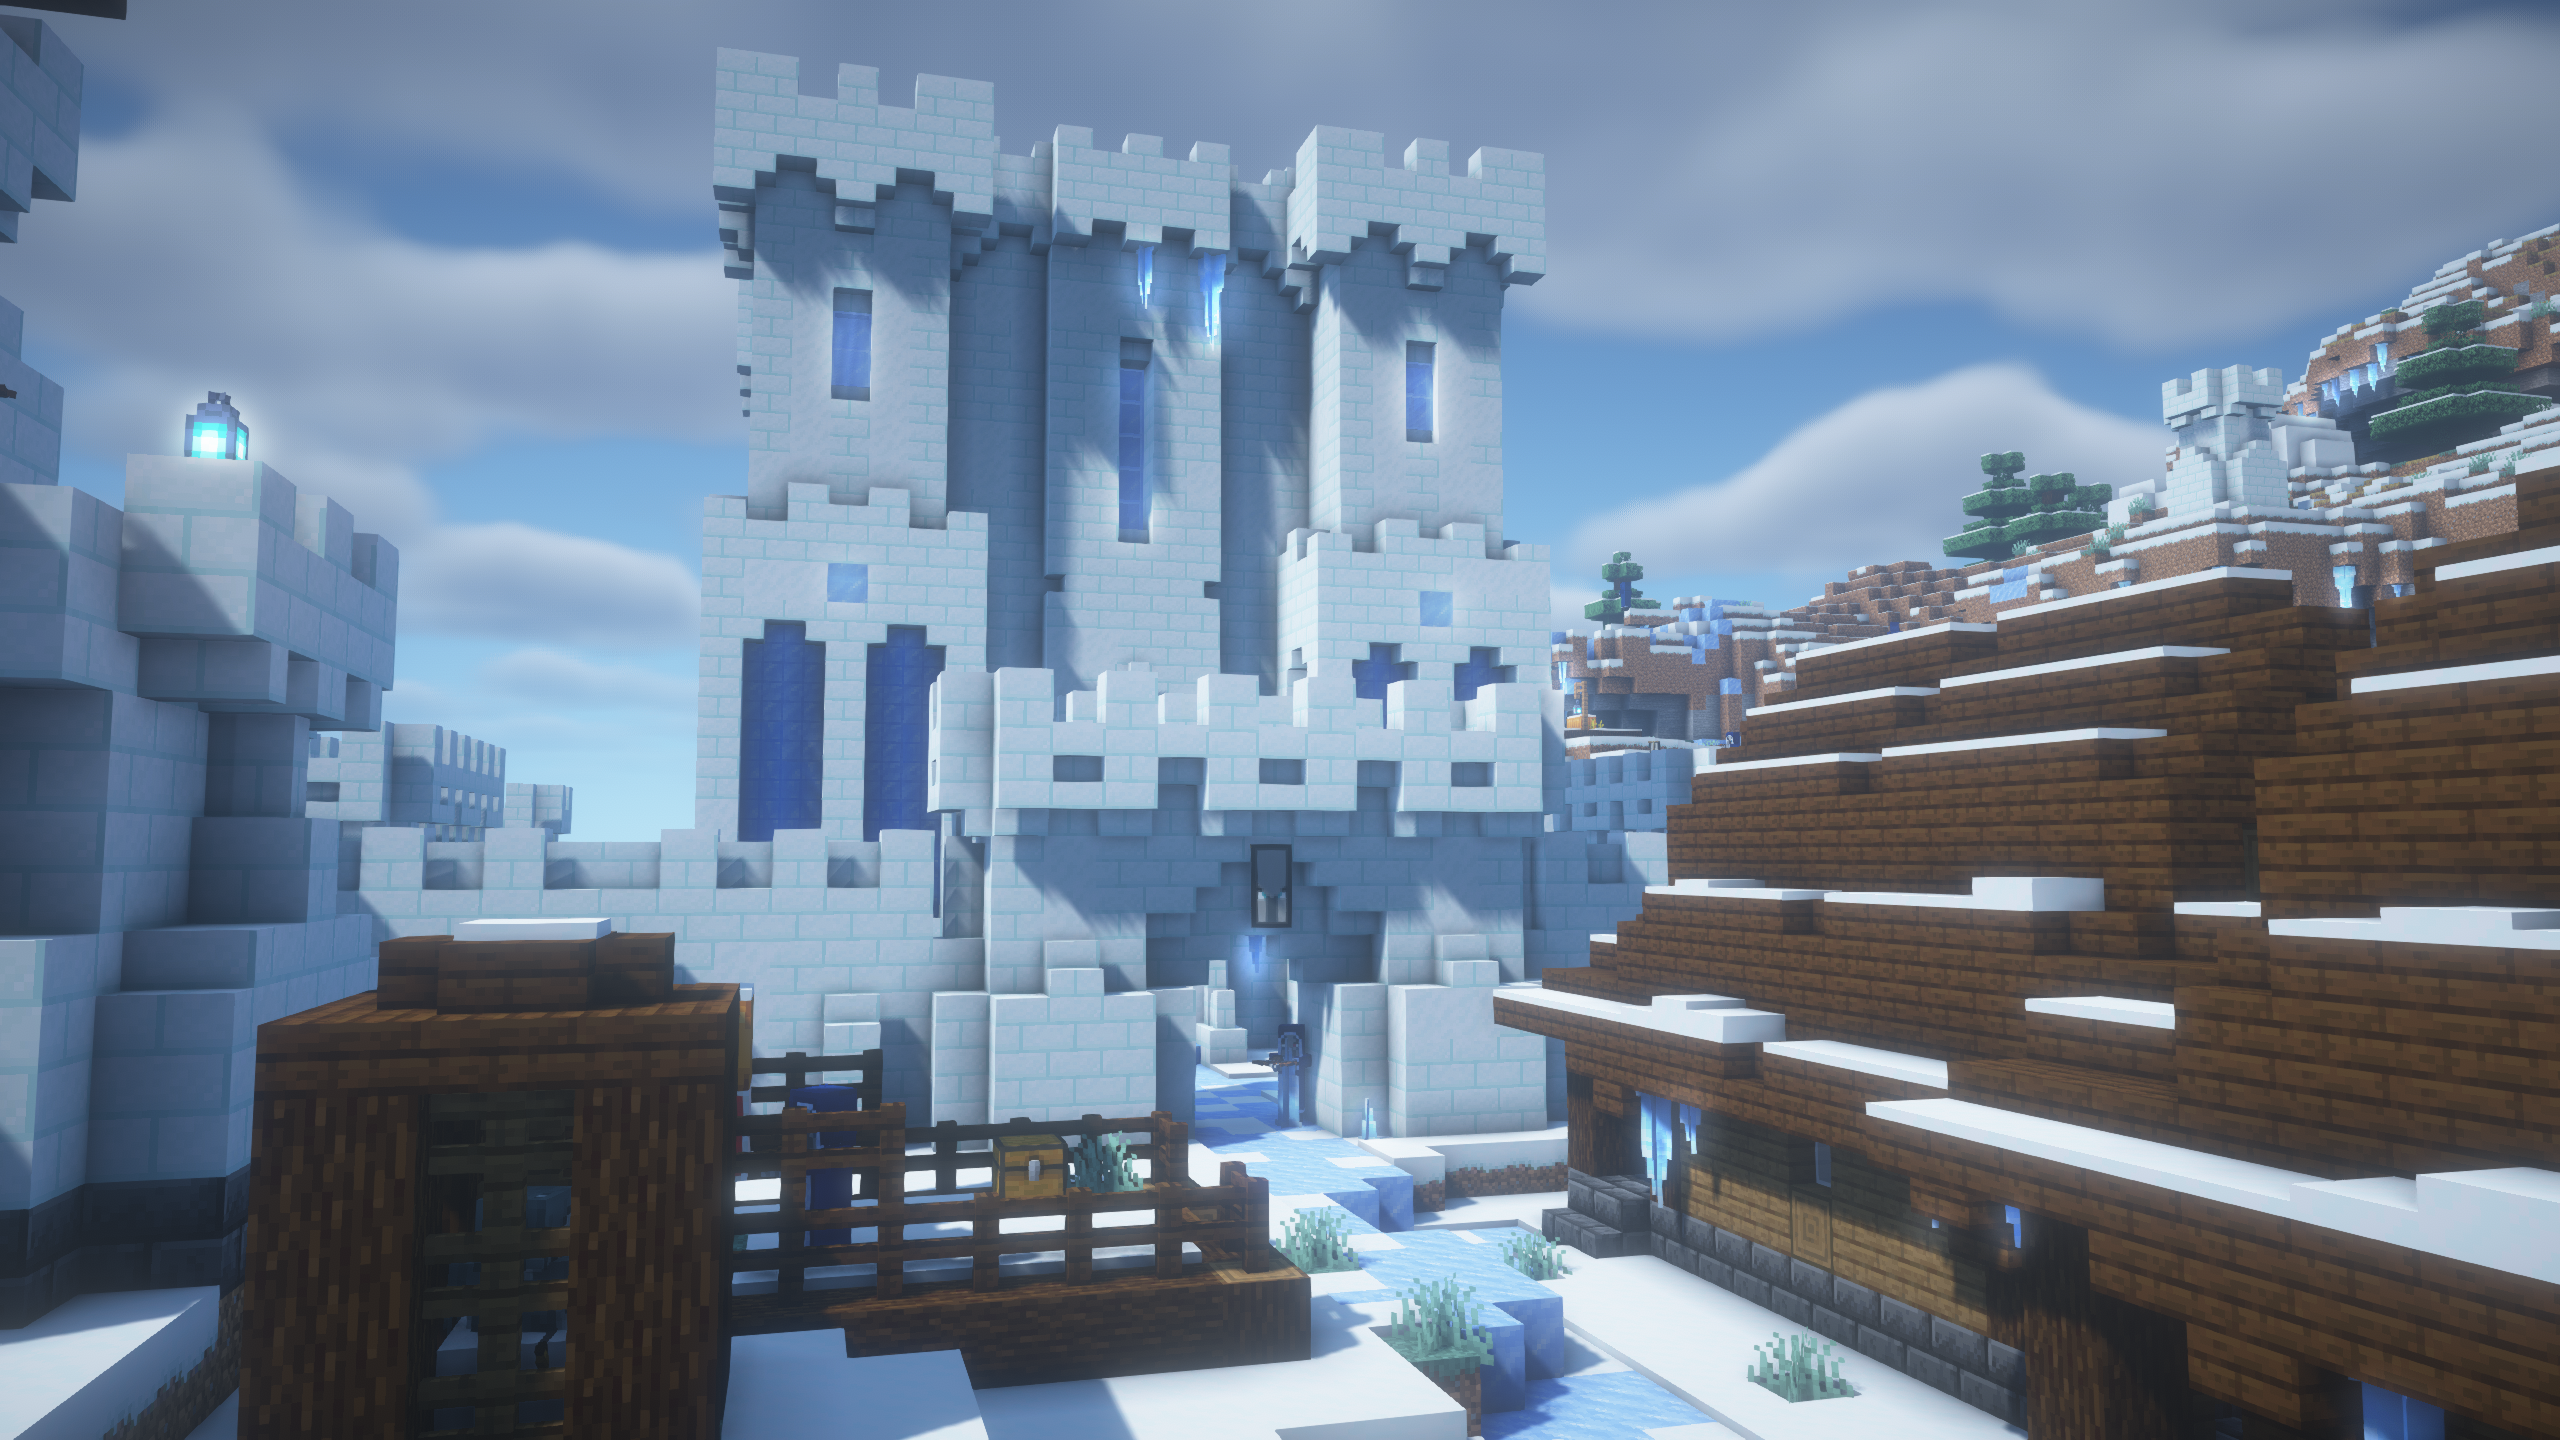 A picture of the Frostologer's Castle, built from packed snow with icicles hanging from the battlements